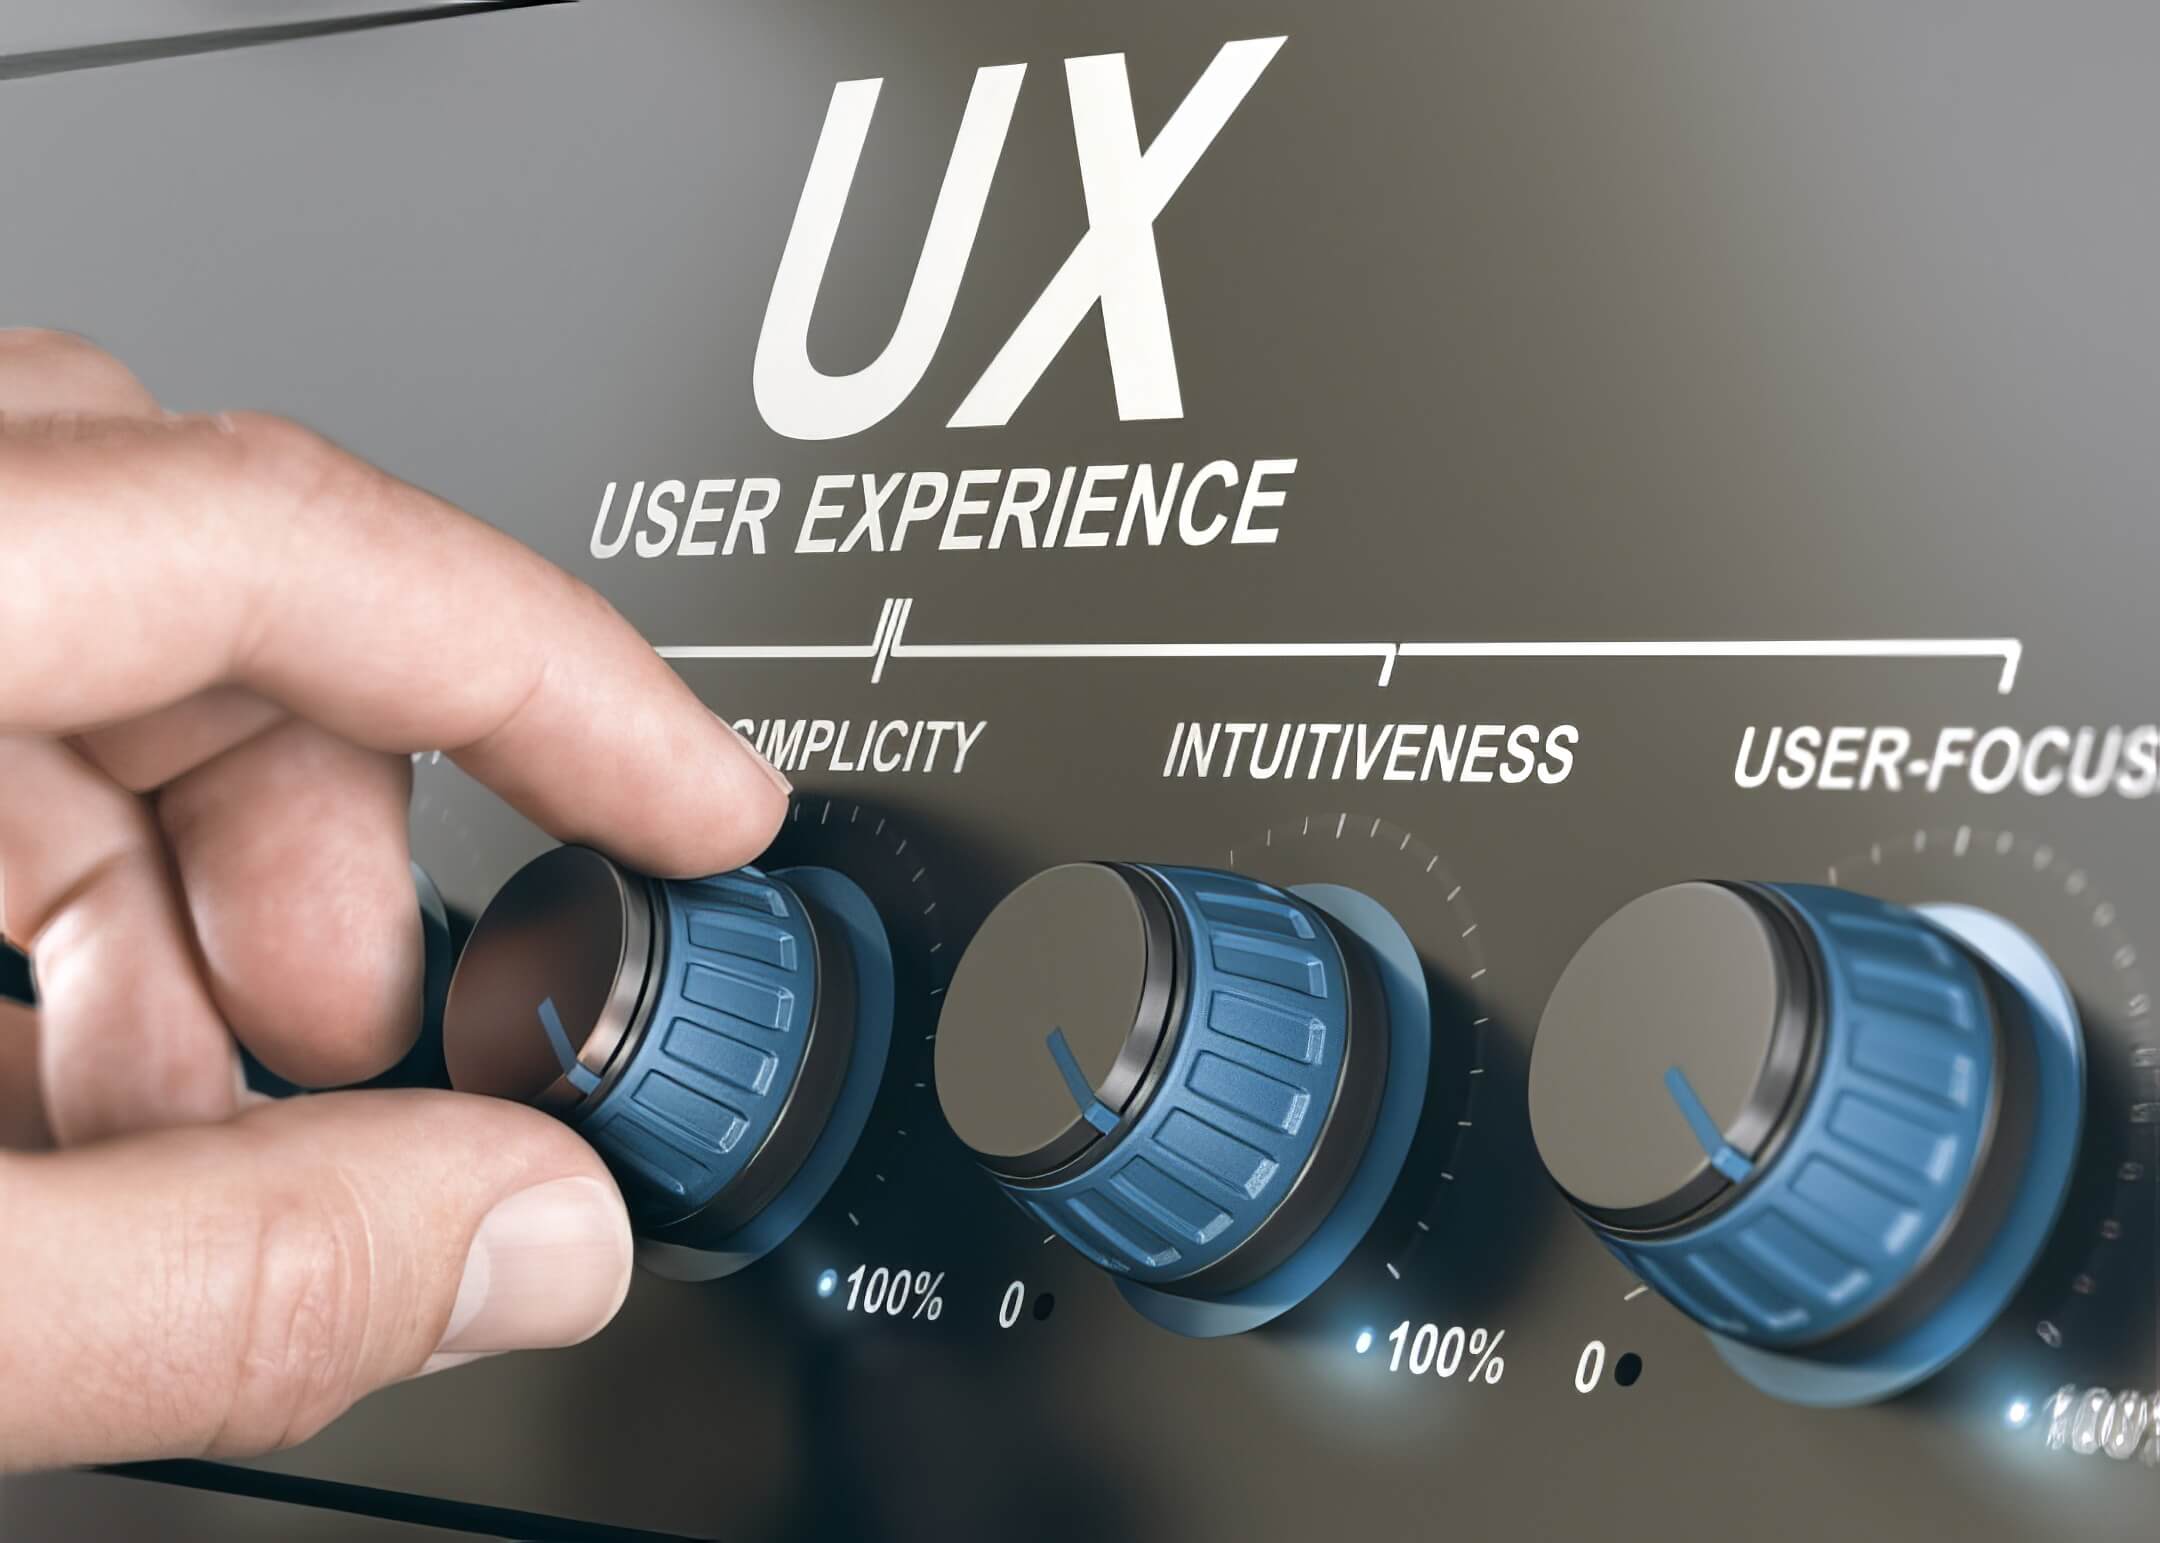 user experience skills depicted in buttons with different skills